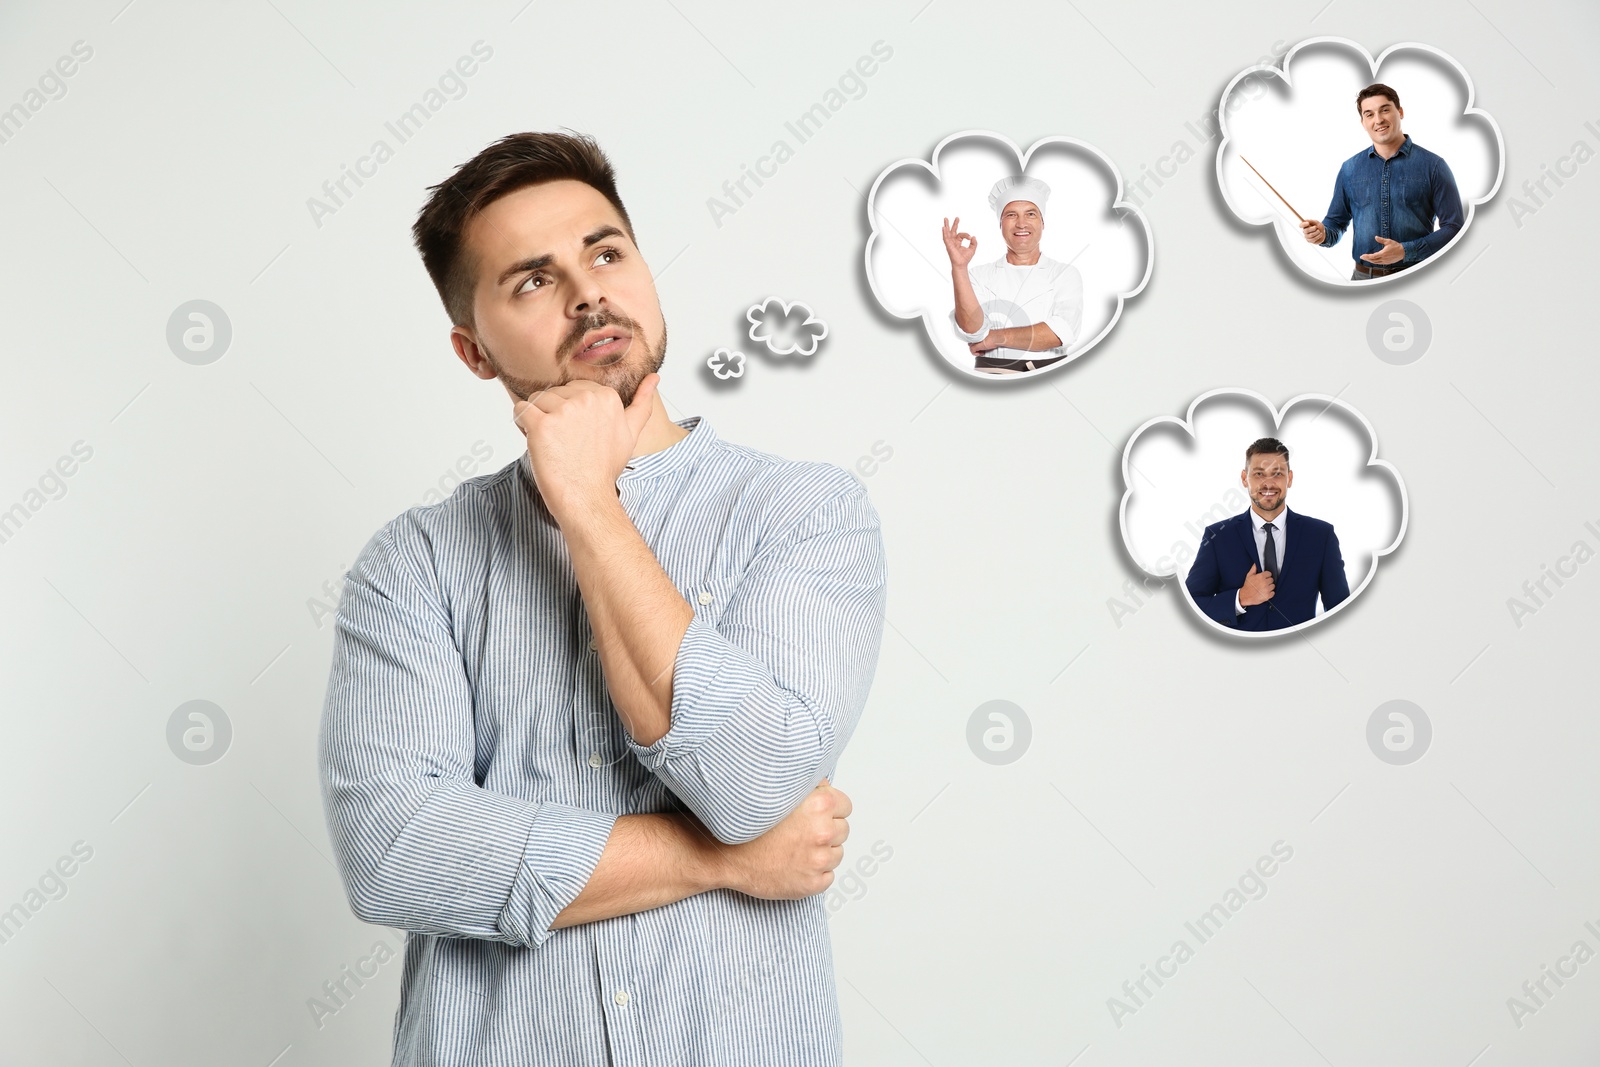 Image of Thoughtful man choosing probable profession on light background